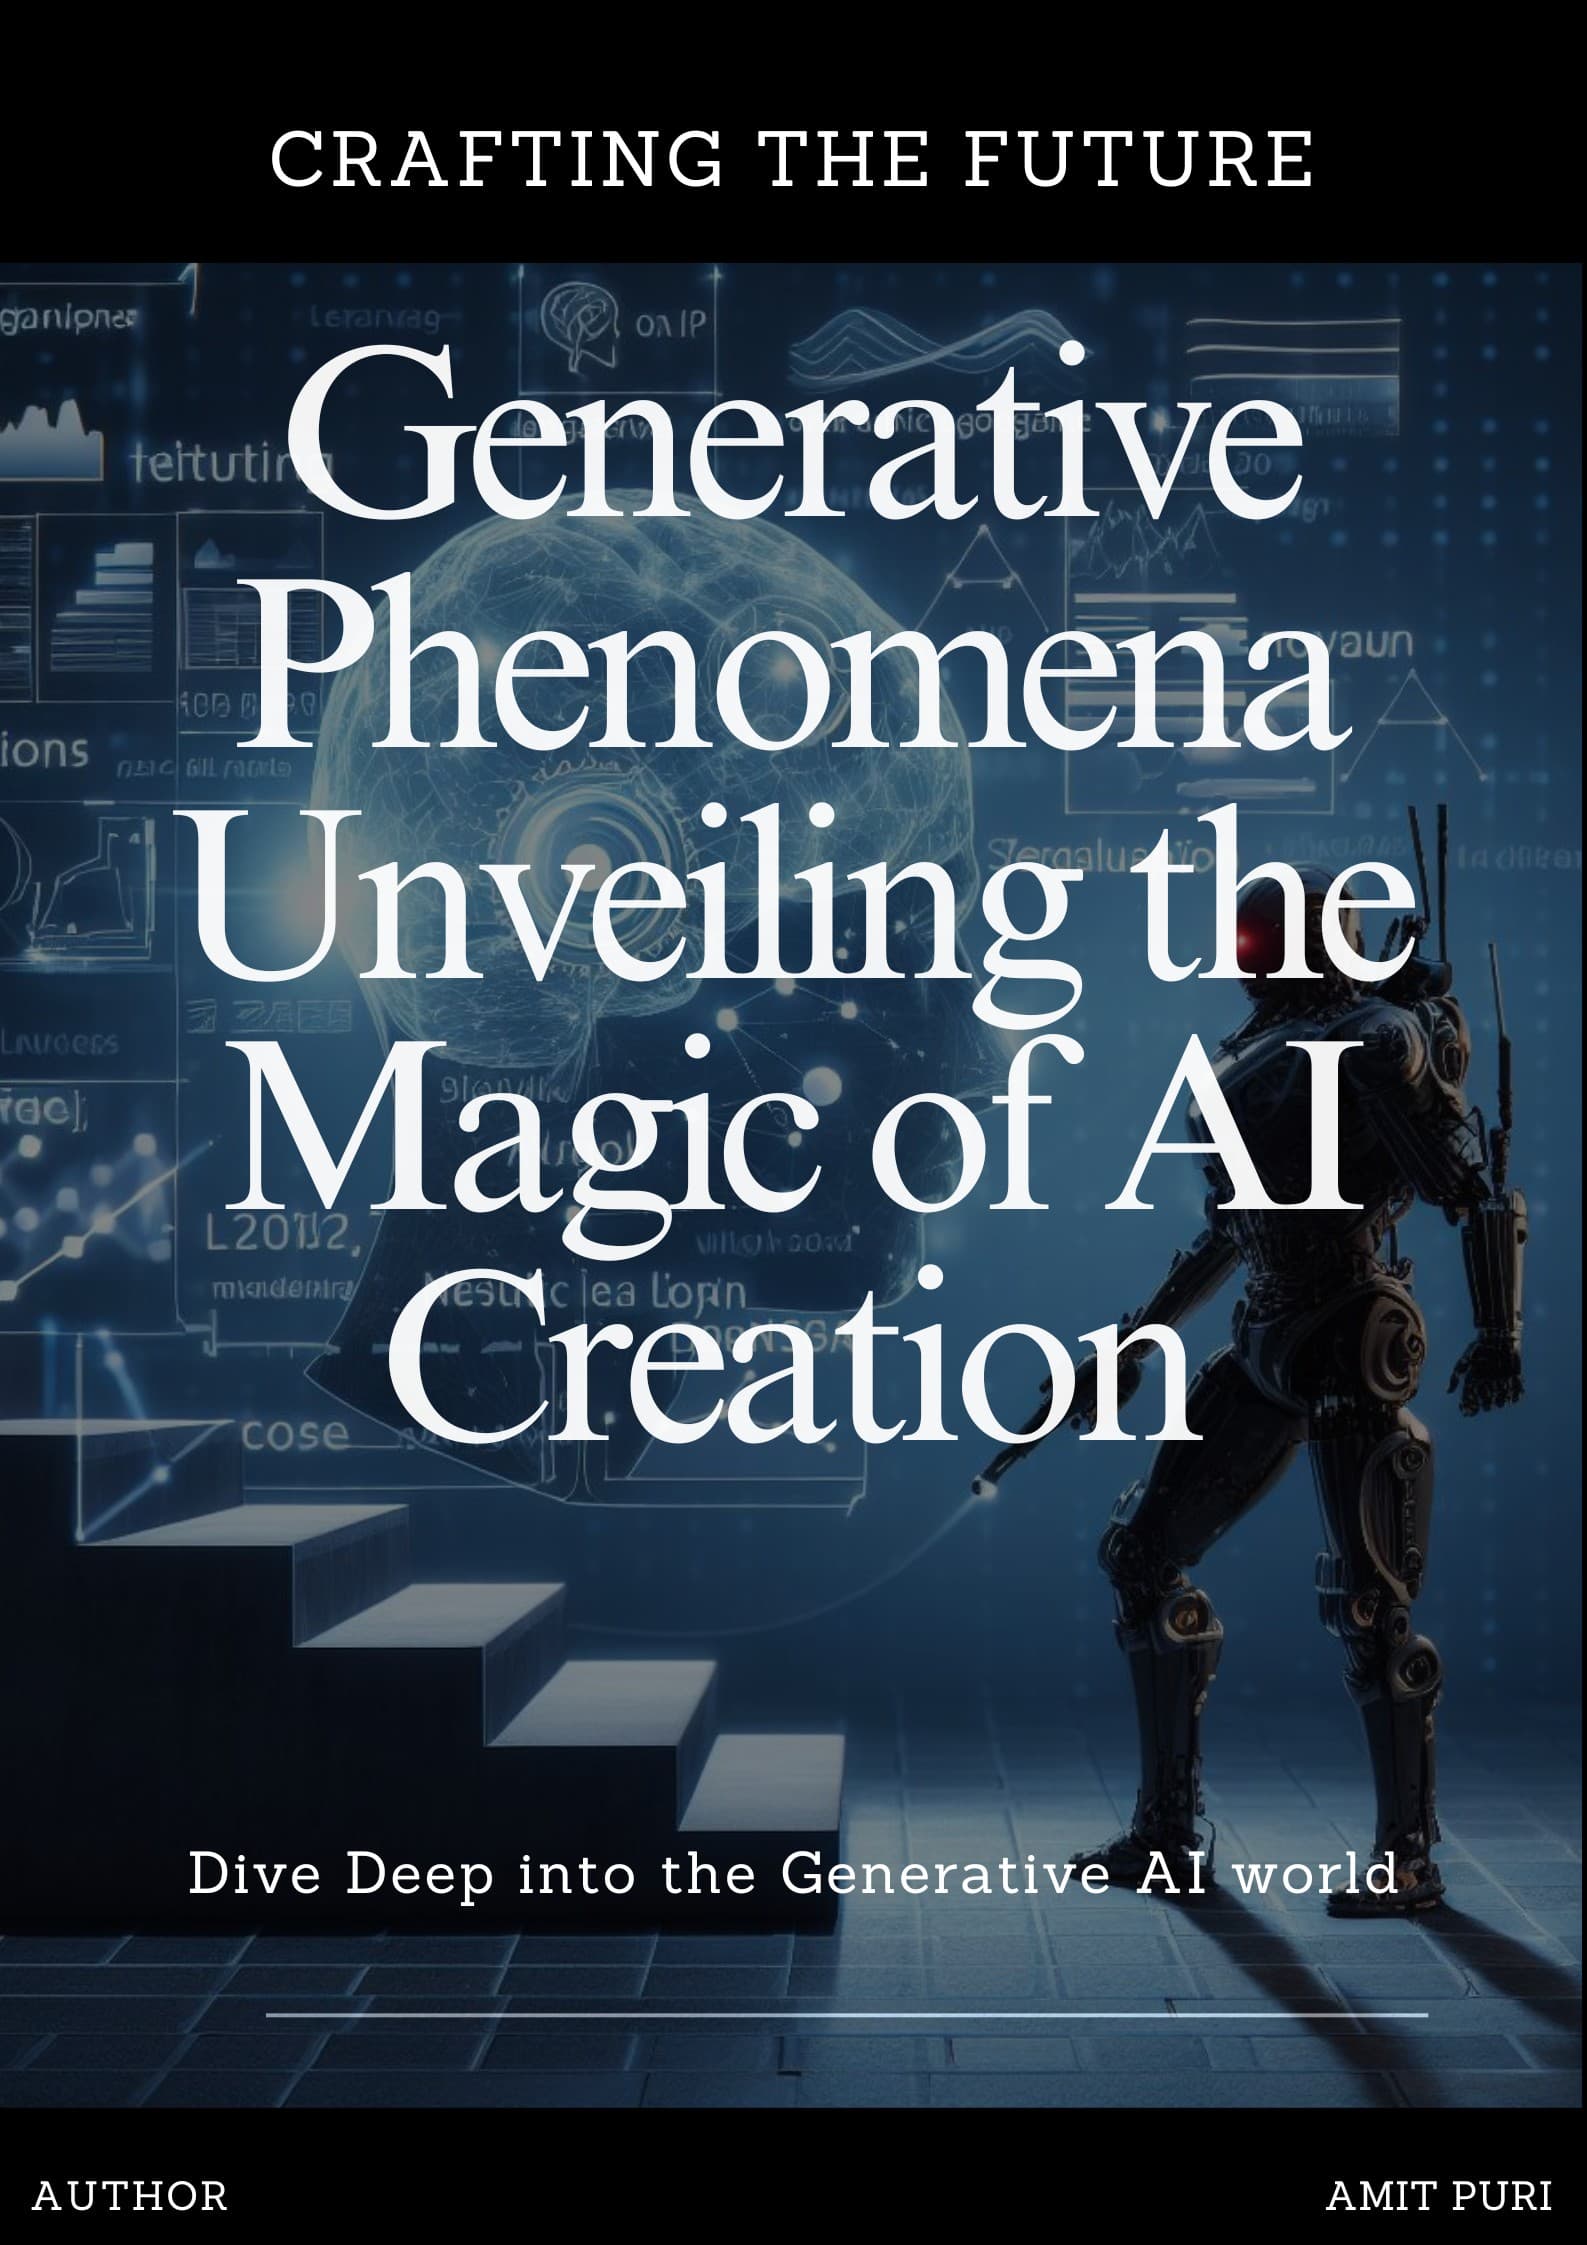 Book outline (preview) - Generative Phenomena Unveiling the Magic of AI Creation